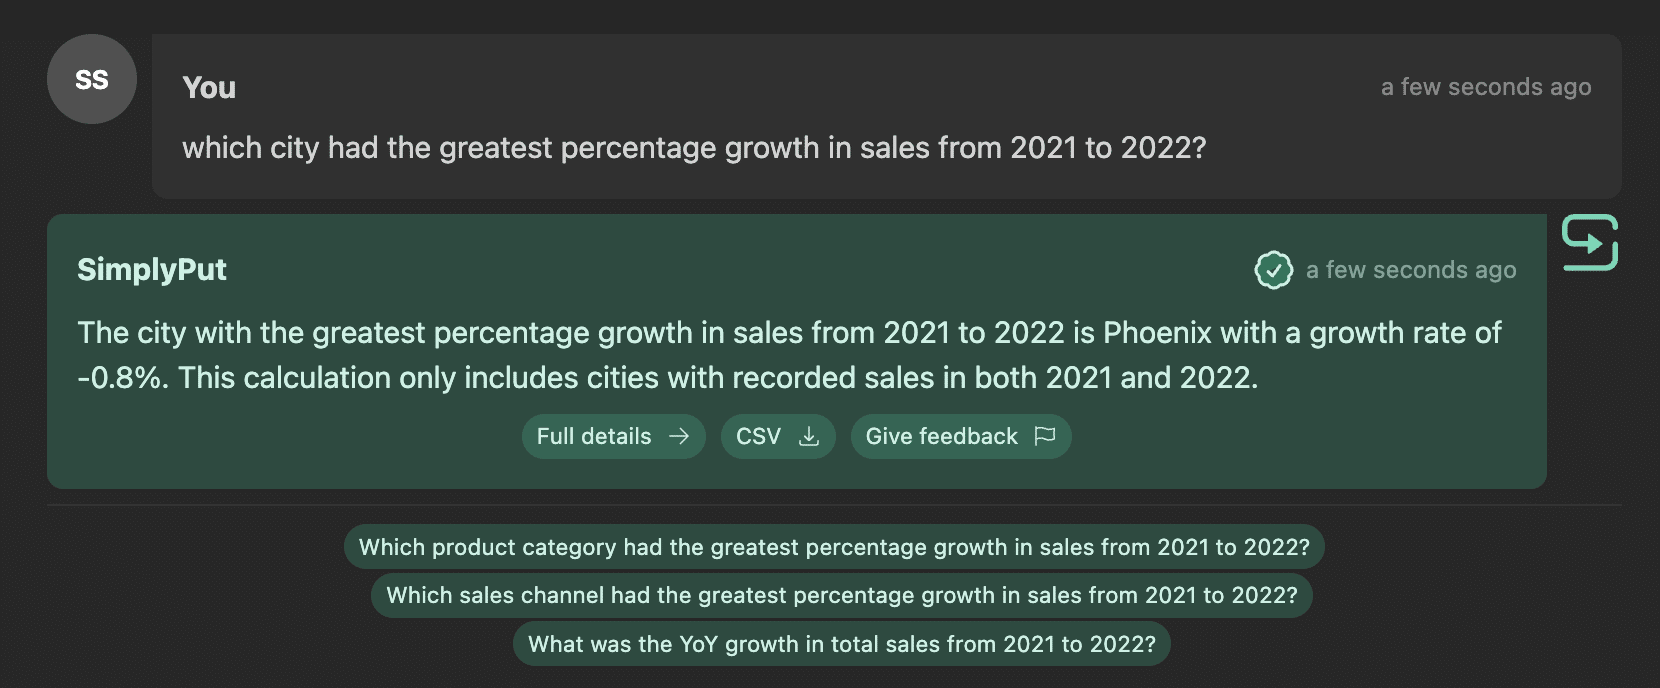 Screenshot of a data query interface where a user asks for the city with the greatest percentage growth in sales from 2021 to 2022. The AI responds that Phoenix had the greatest growth rate at -0.8%, noting that the calculation includes only cities with recorded sales in both 2021 and 2022. Additional questions about product category and sales channel growth, and year-over-year growth in total sales are also displayed but not yet answered by the AI.